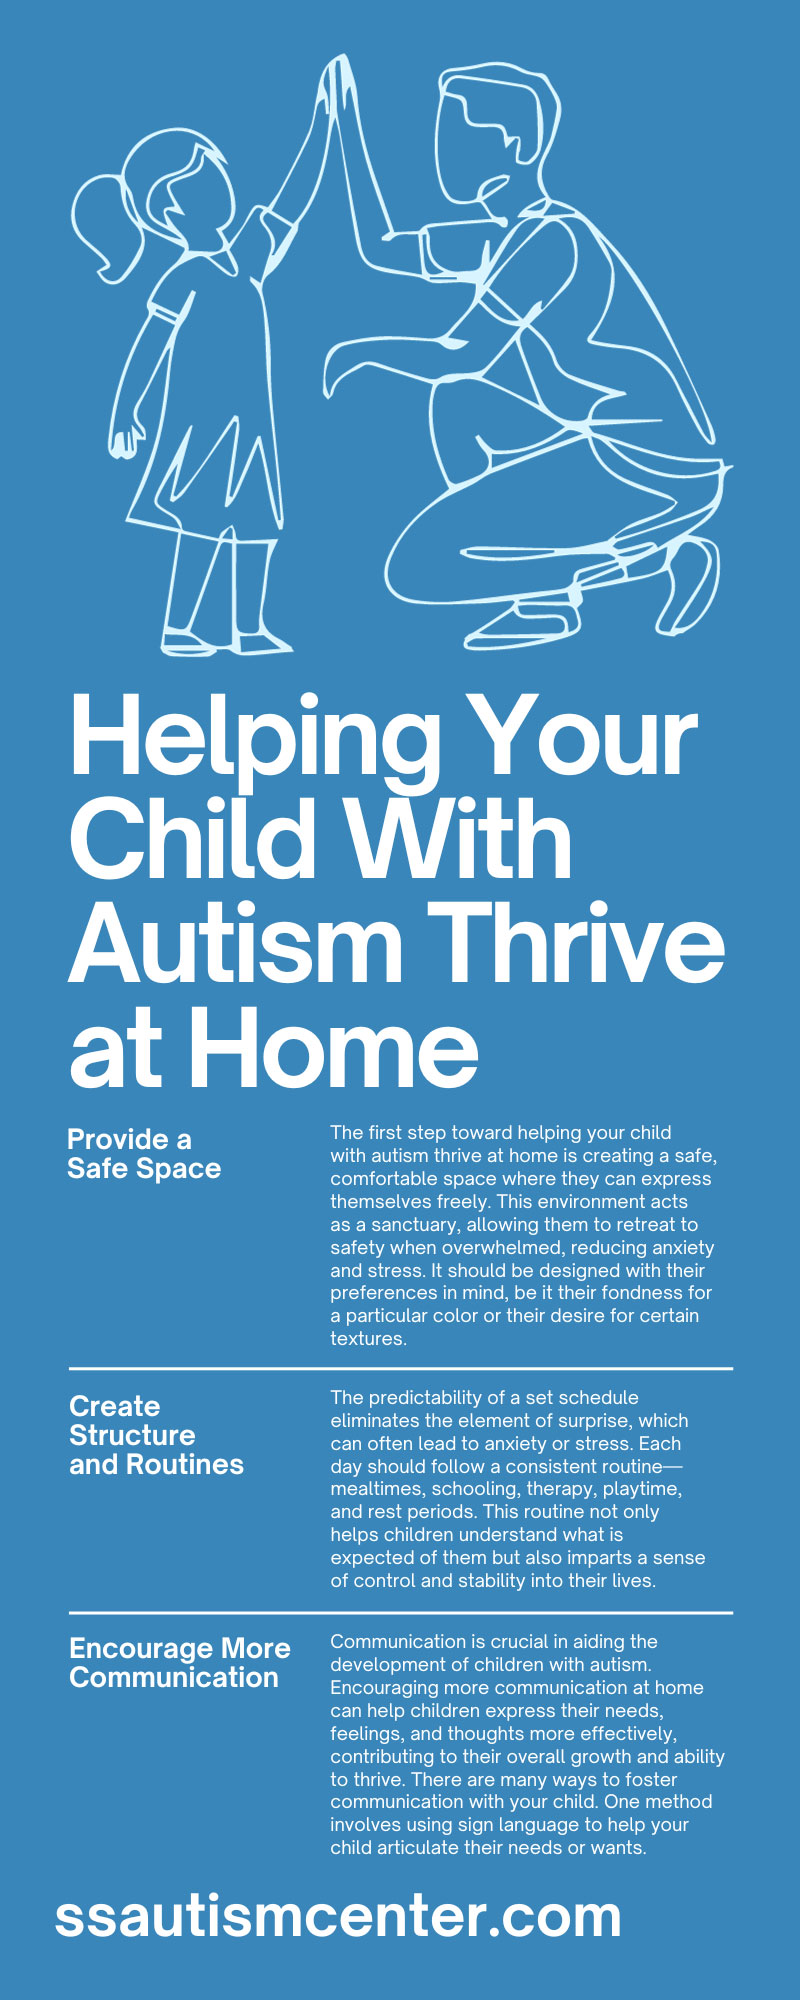 Helping Your Child With Autism Thrive at Home